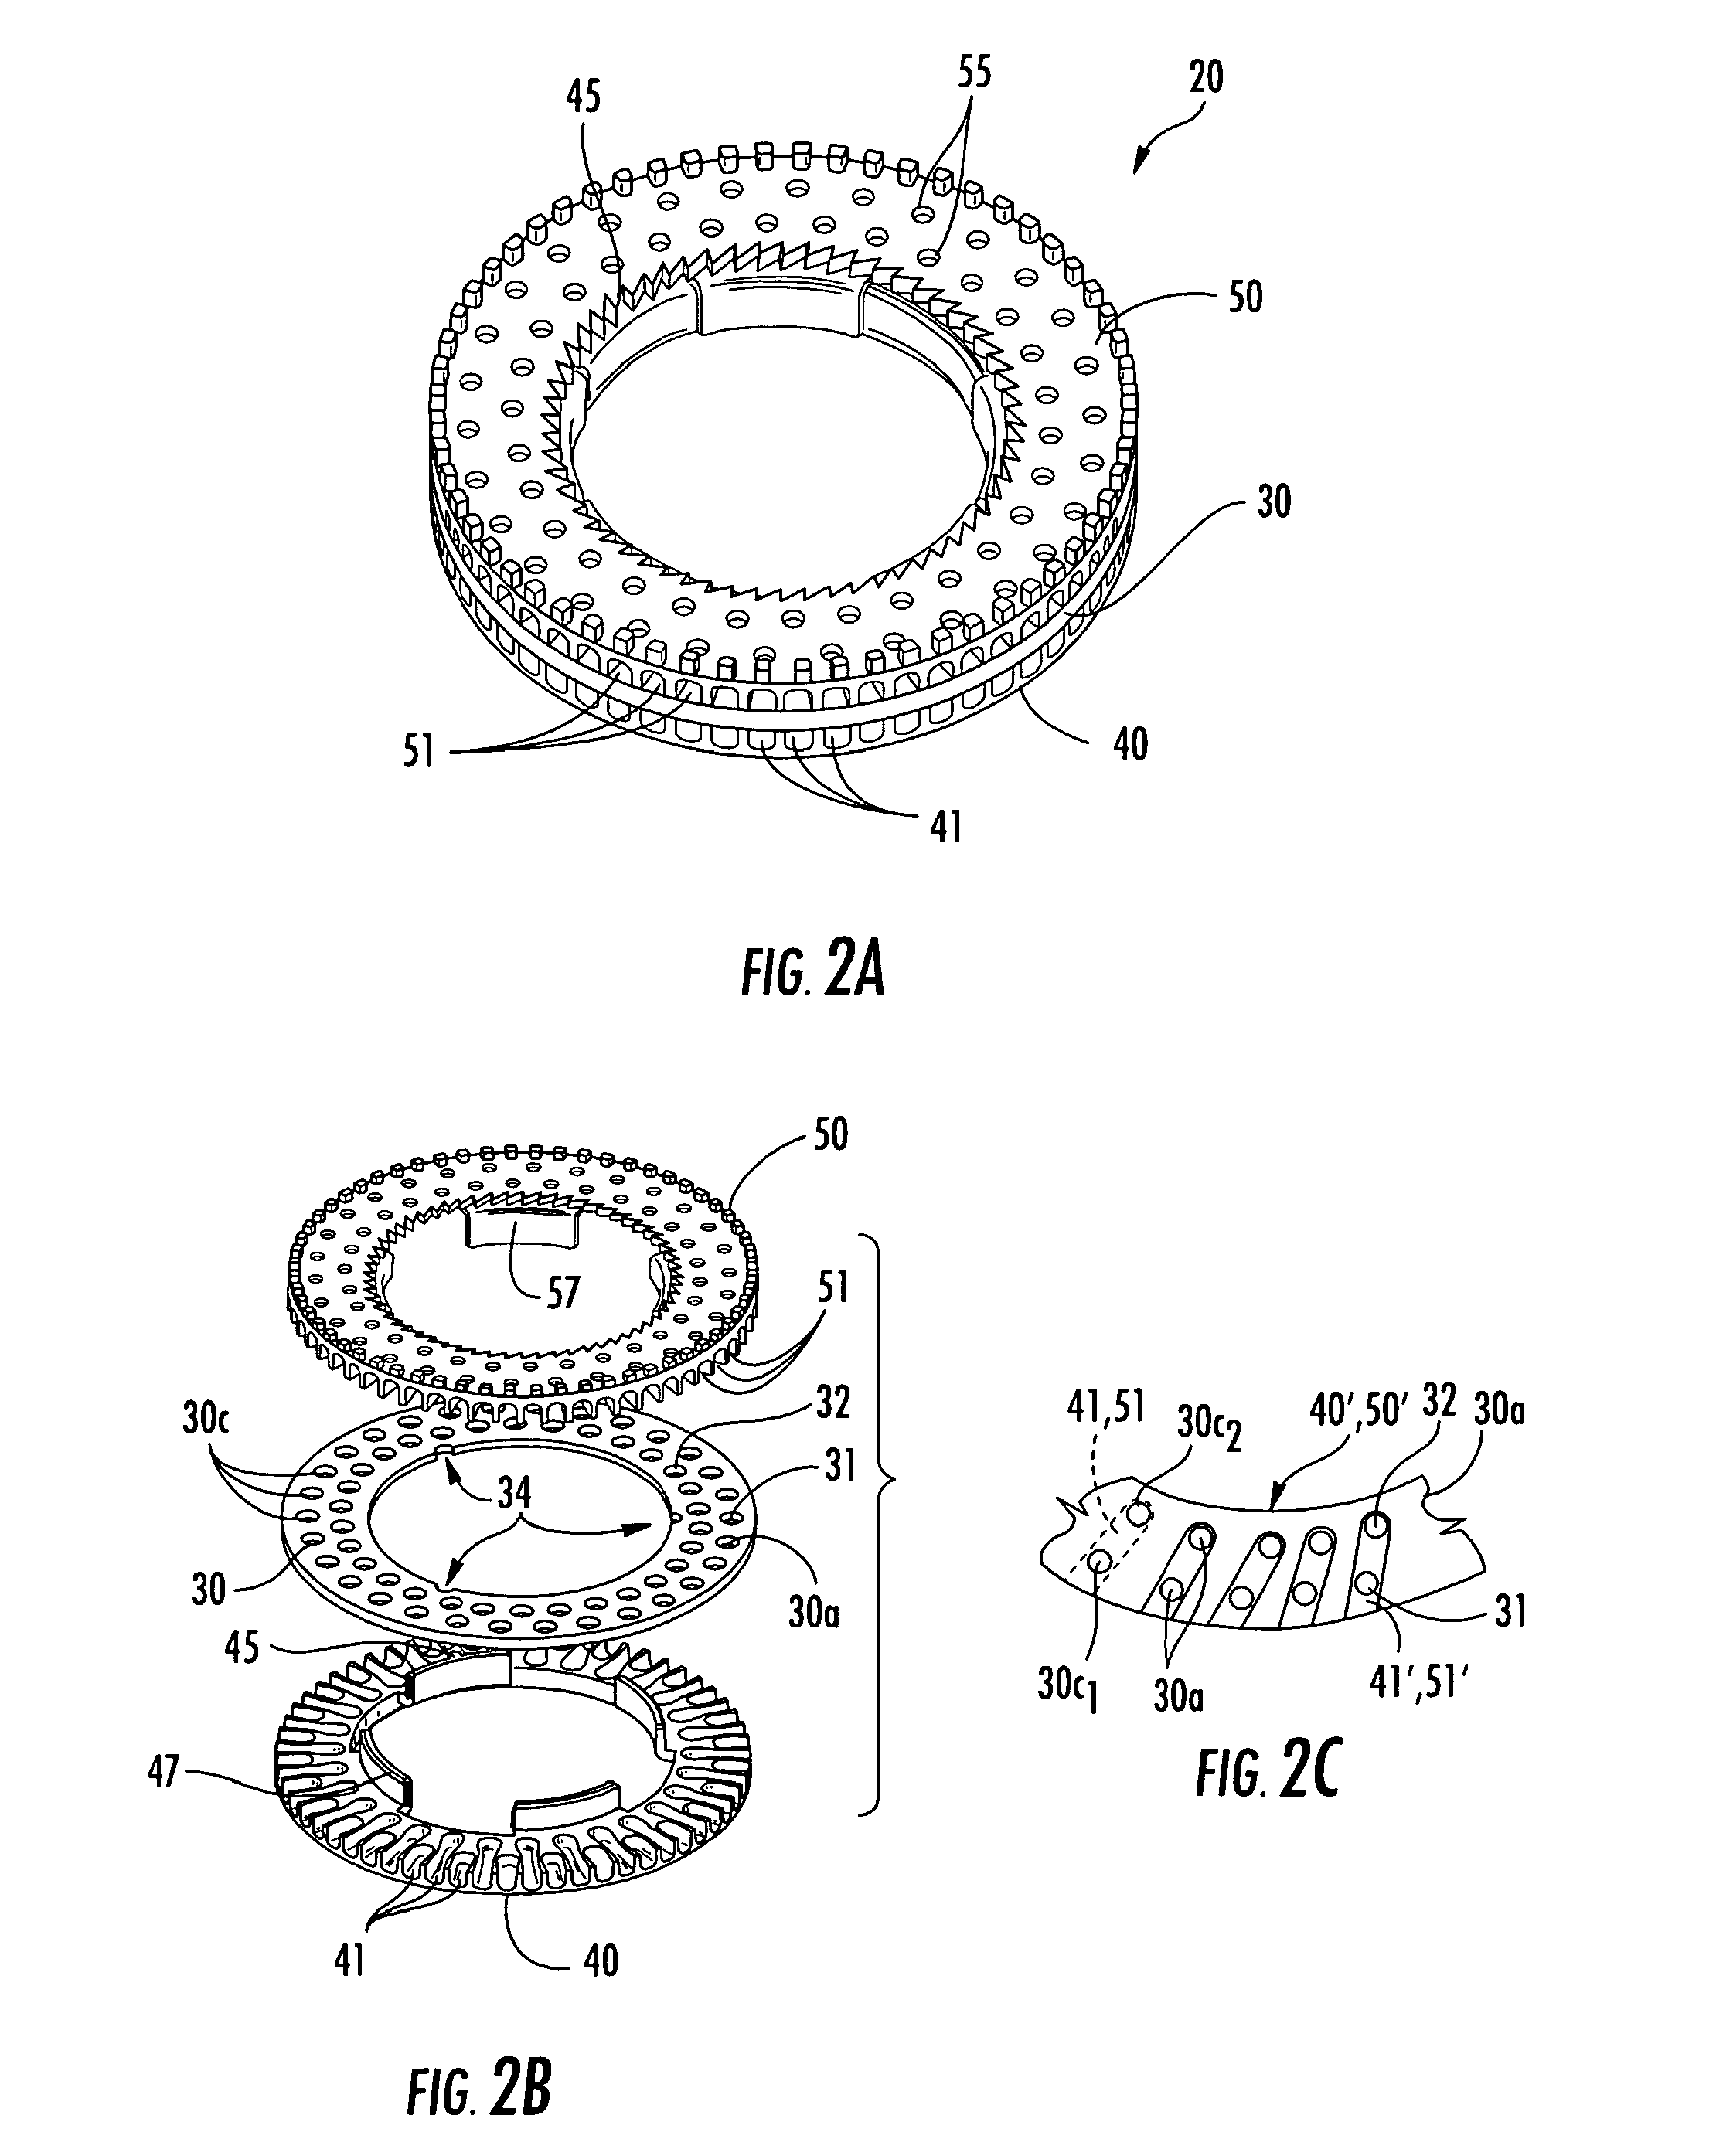 Dry powder inhalers with multi-facet surface deagglomeration chambers and related devices and methods